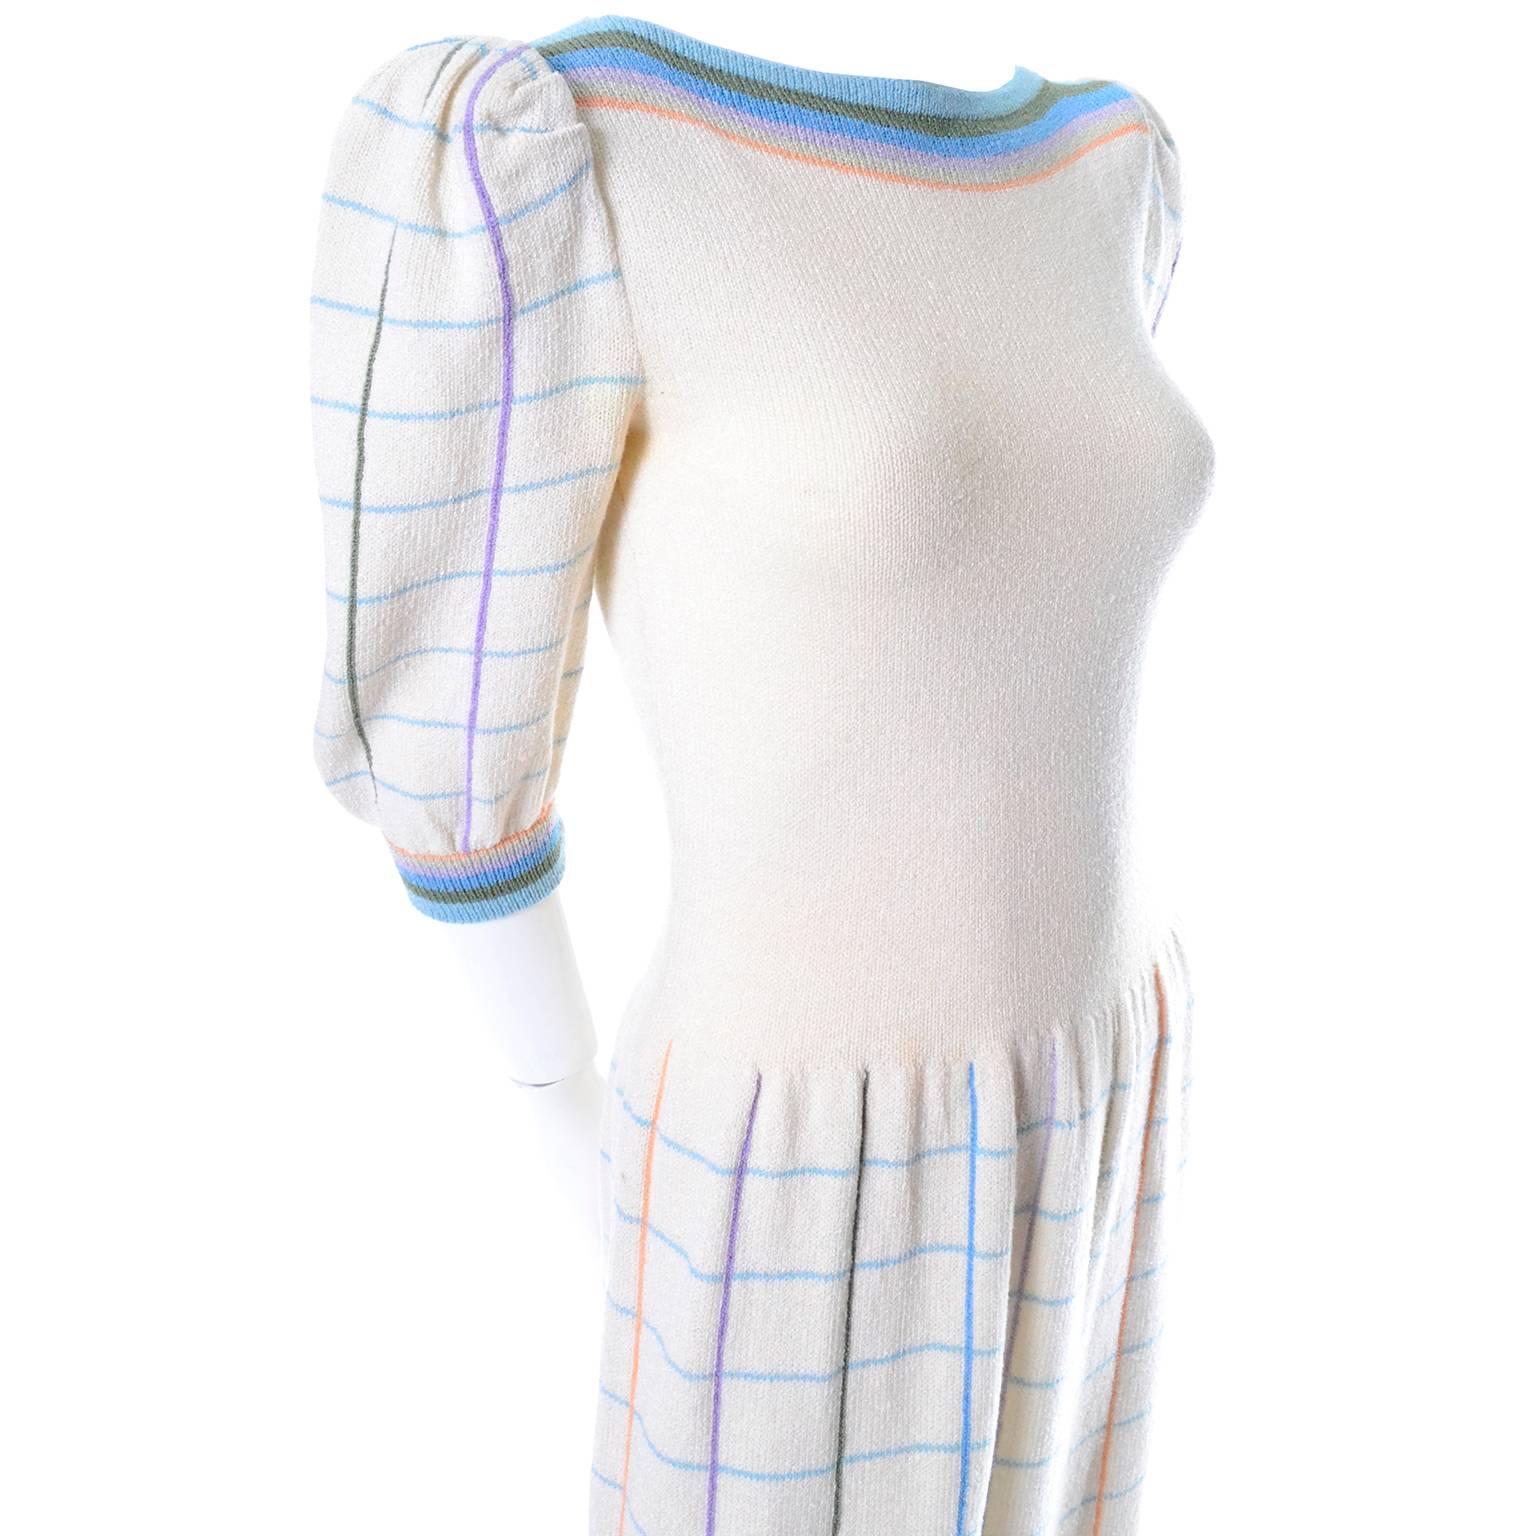 This adorable creamy winter white Adolfo vintage dress was purchased at I Magnin in the 1970's.  The dress is made of a wool/rayon blend knit and has pretty pastel window pane plaid on the skirt and sleeves, and pastel stripes on the collar and